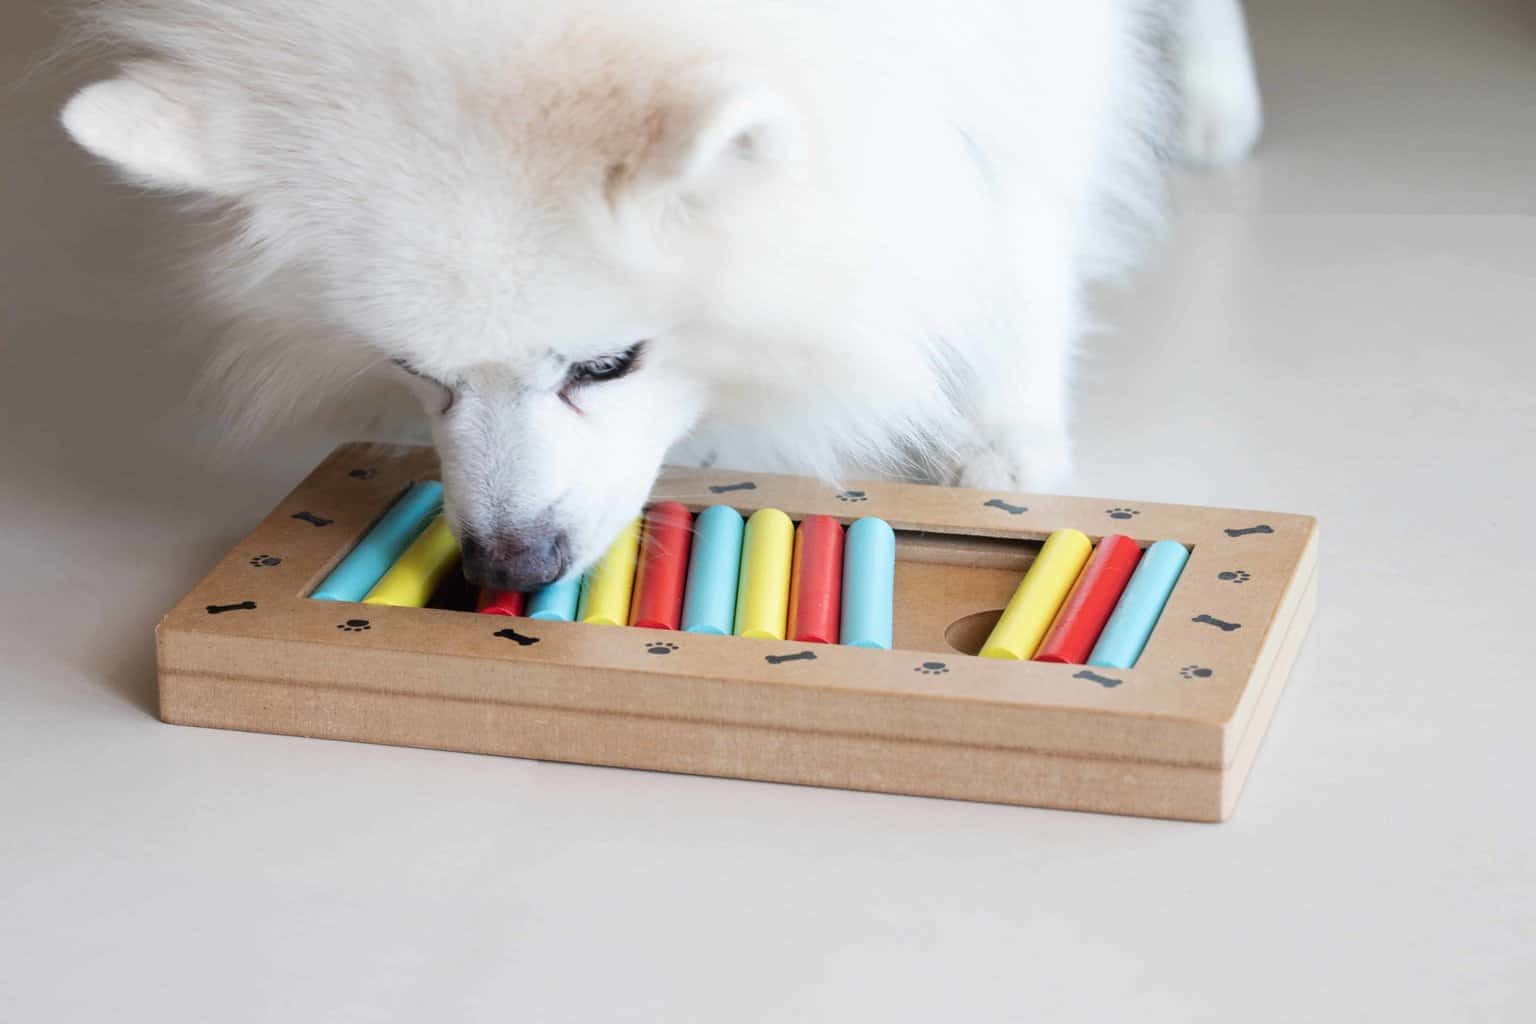 Fluffy white dog plays with dog puzzle toy. Interactive dog toys help stave off boredom and keep dogs sharp and engaged, making for a happy and healthy pup.